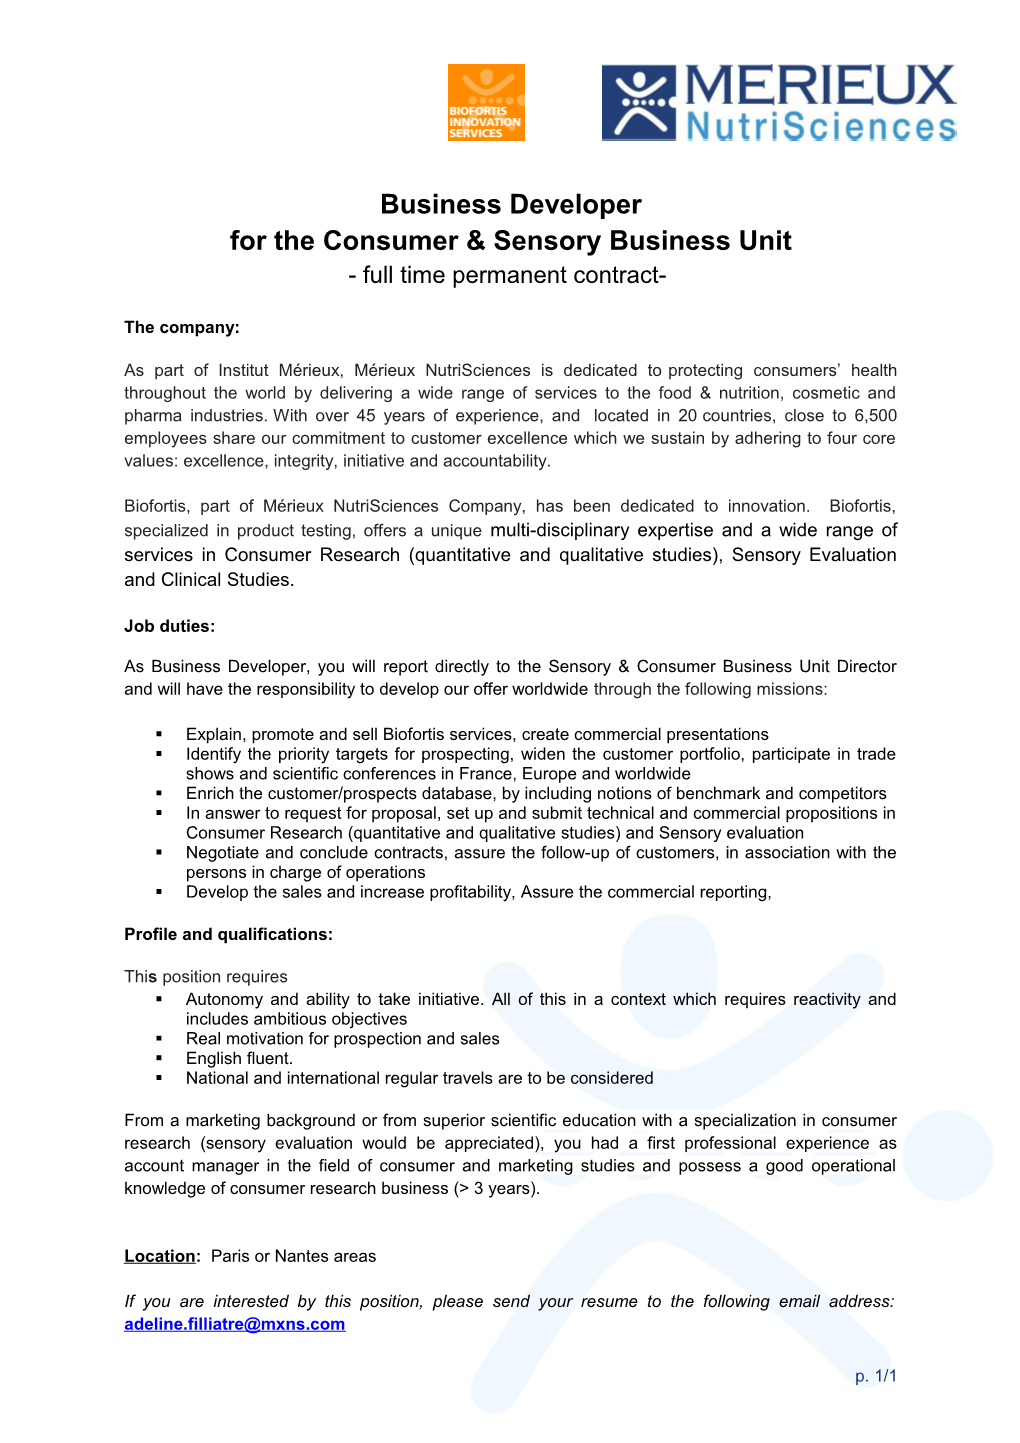 For the Consumer & Sensory Business Unit